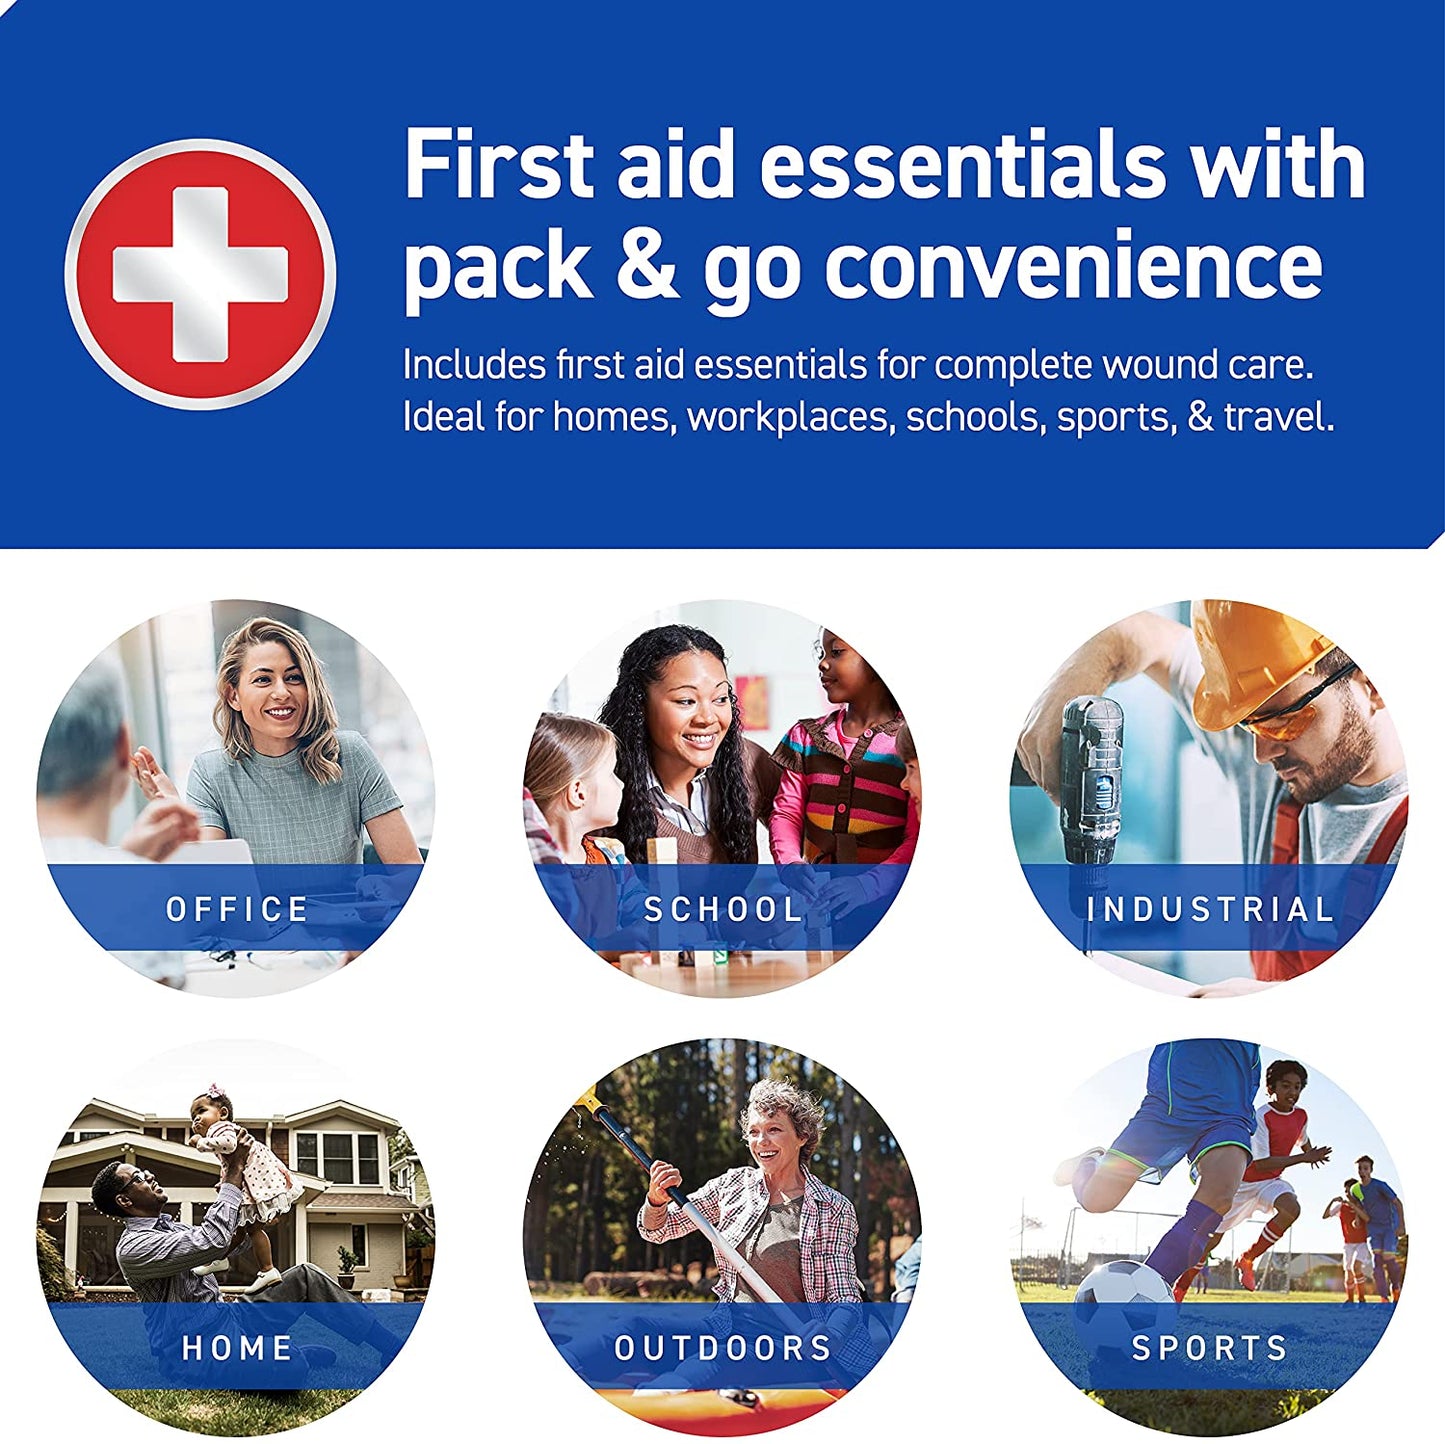 Care Science First Aid Kit, 100 Pieces Professional Use for Travel, Work, School, Home, Car, Survival, Camping, Hiking, and More